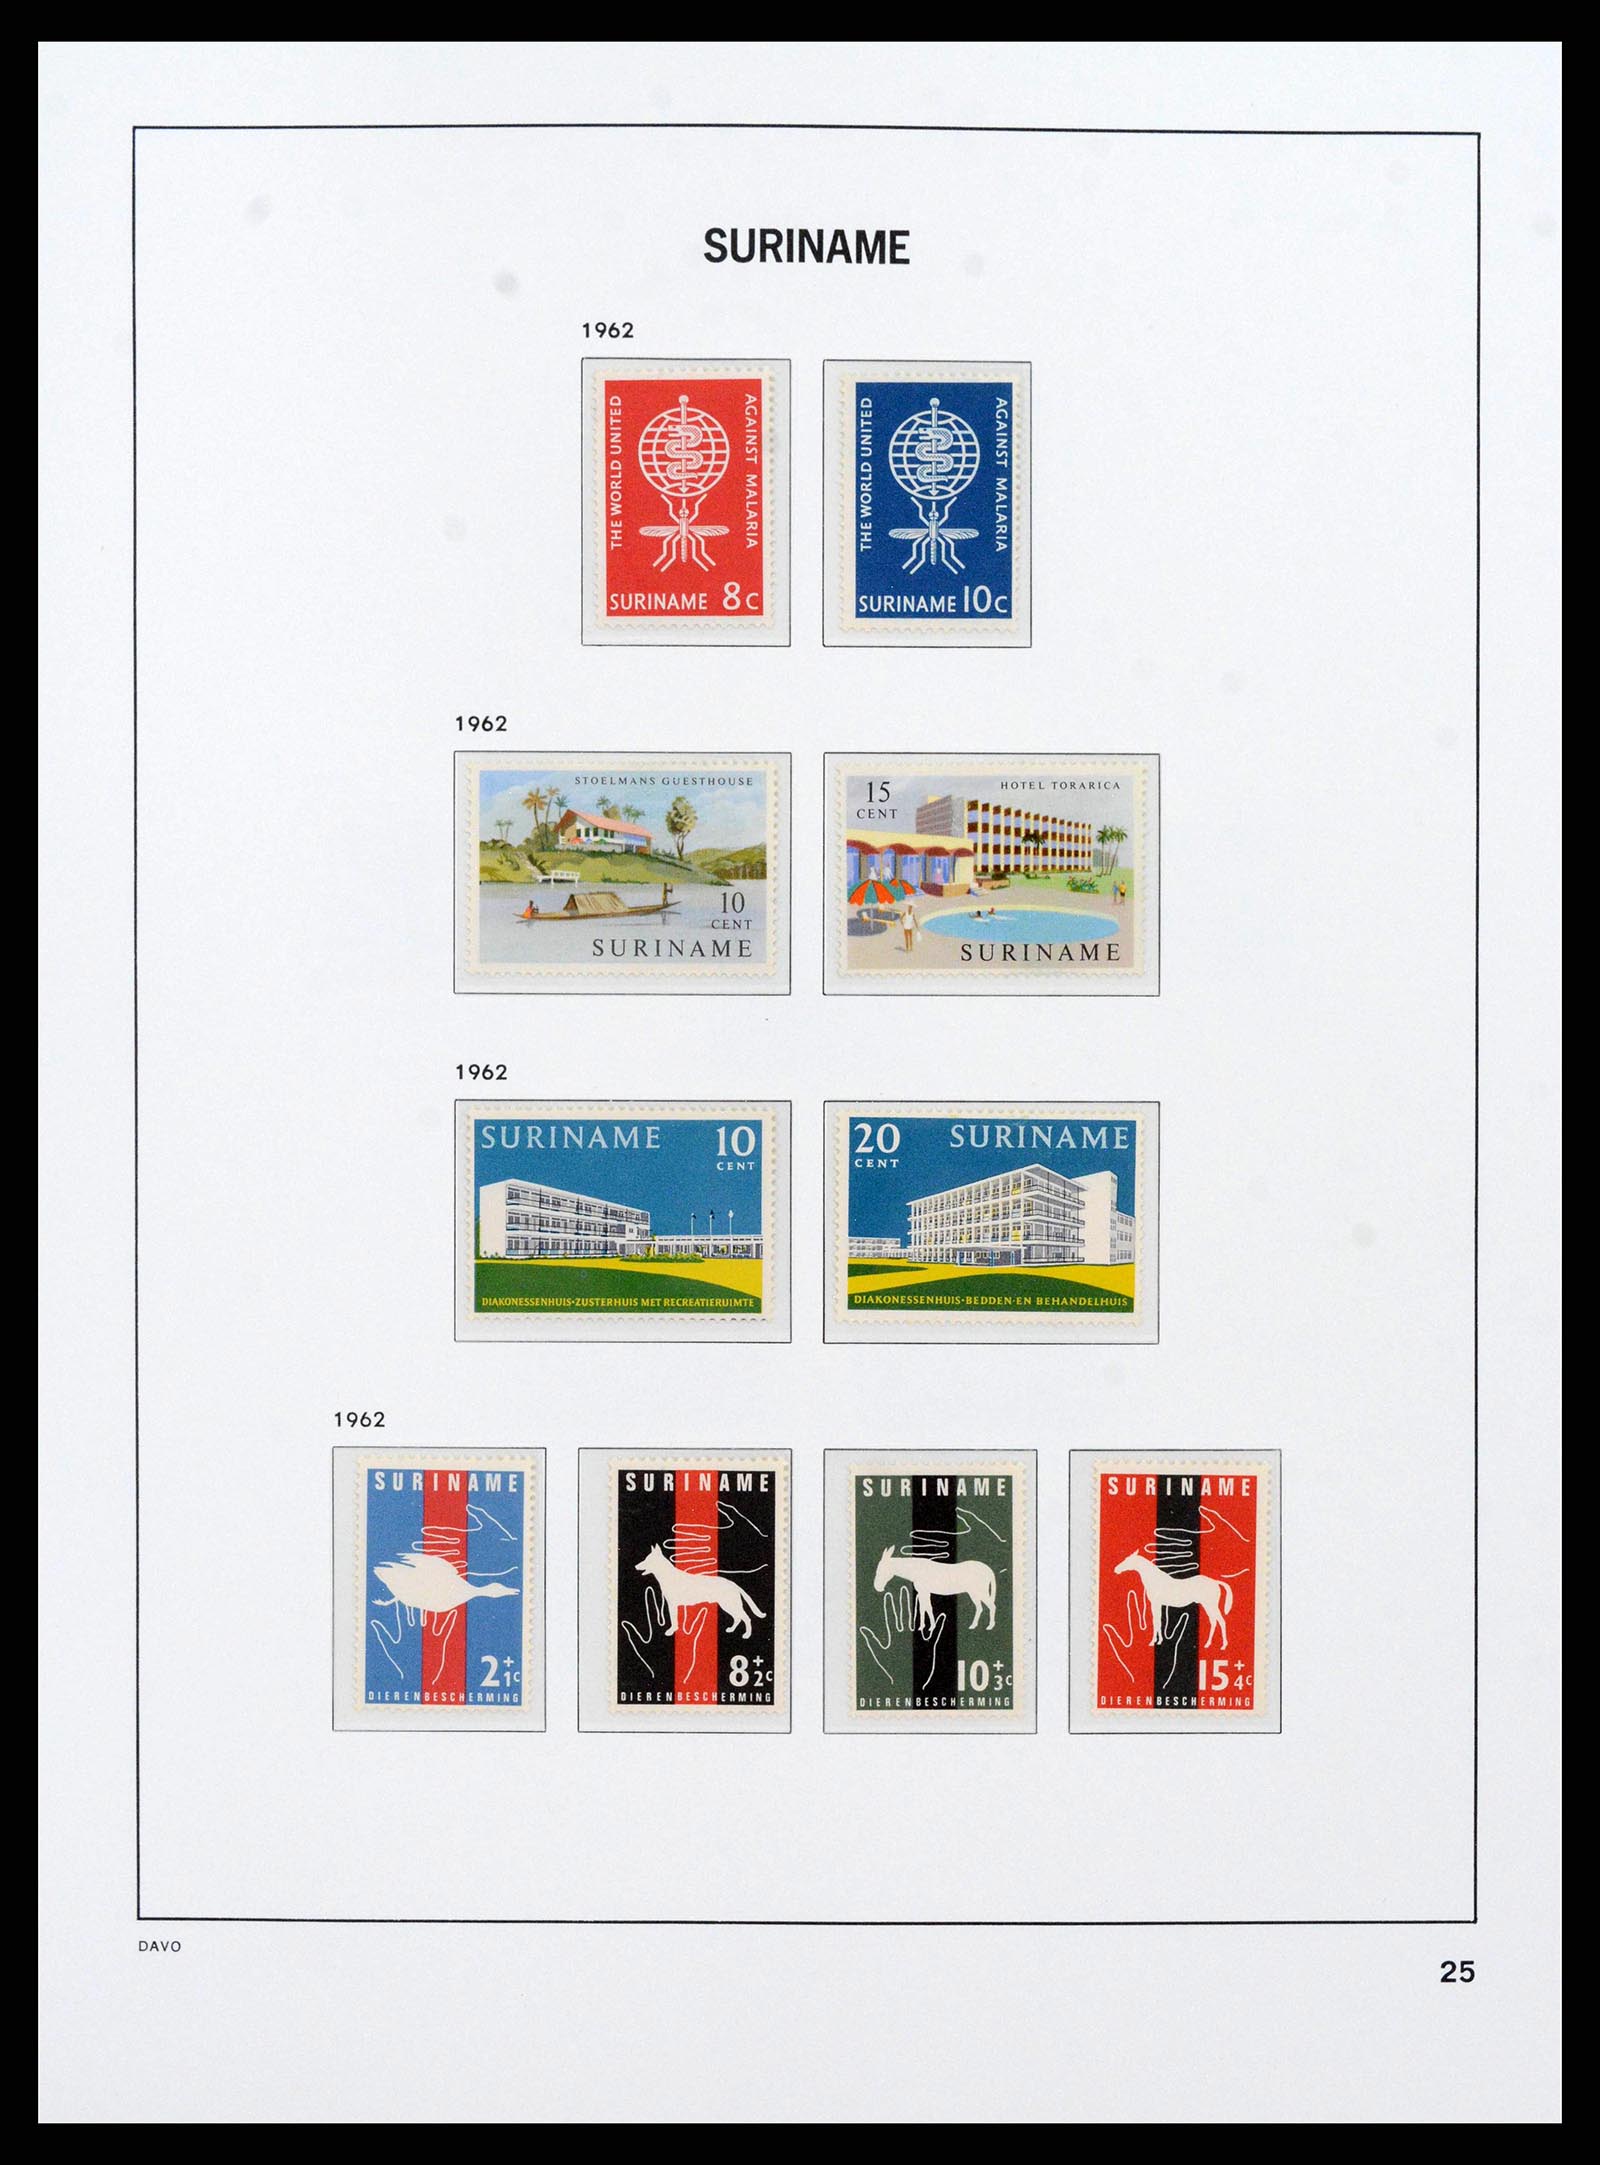 38466 0026 - Stamp collection 38466 Suriname 1873-1975.